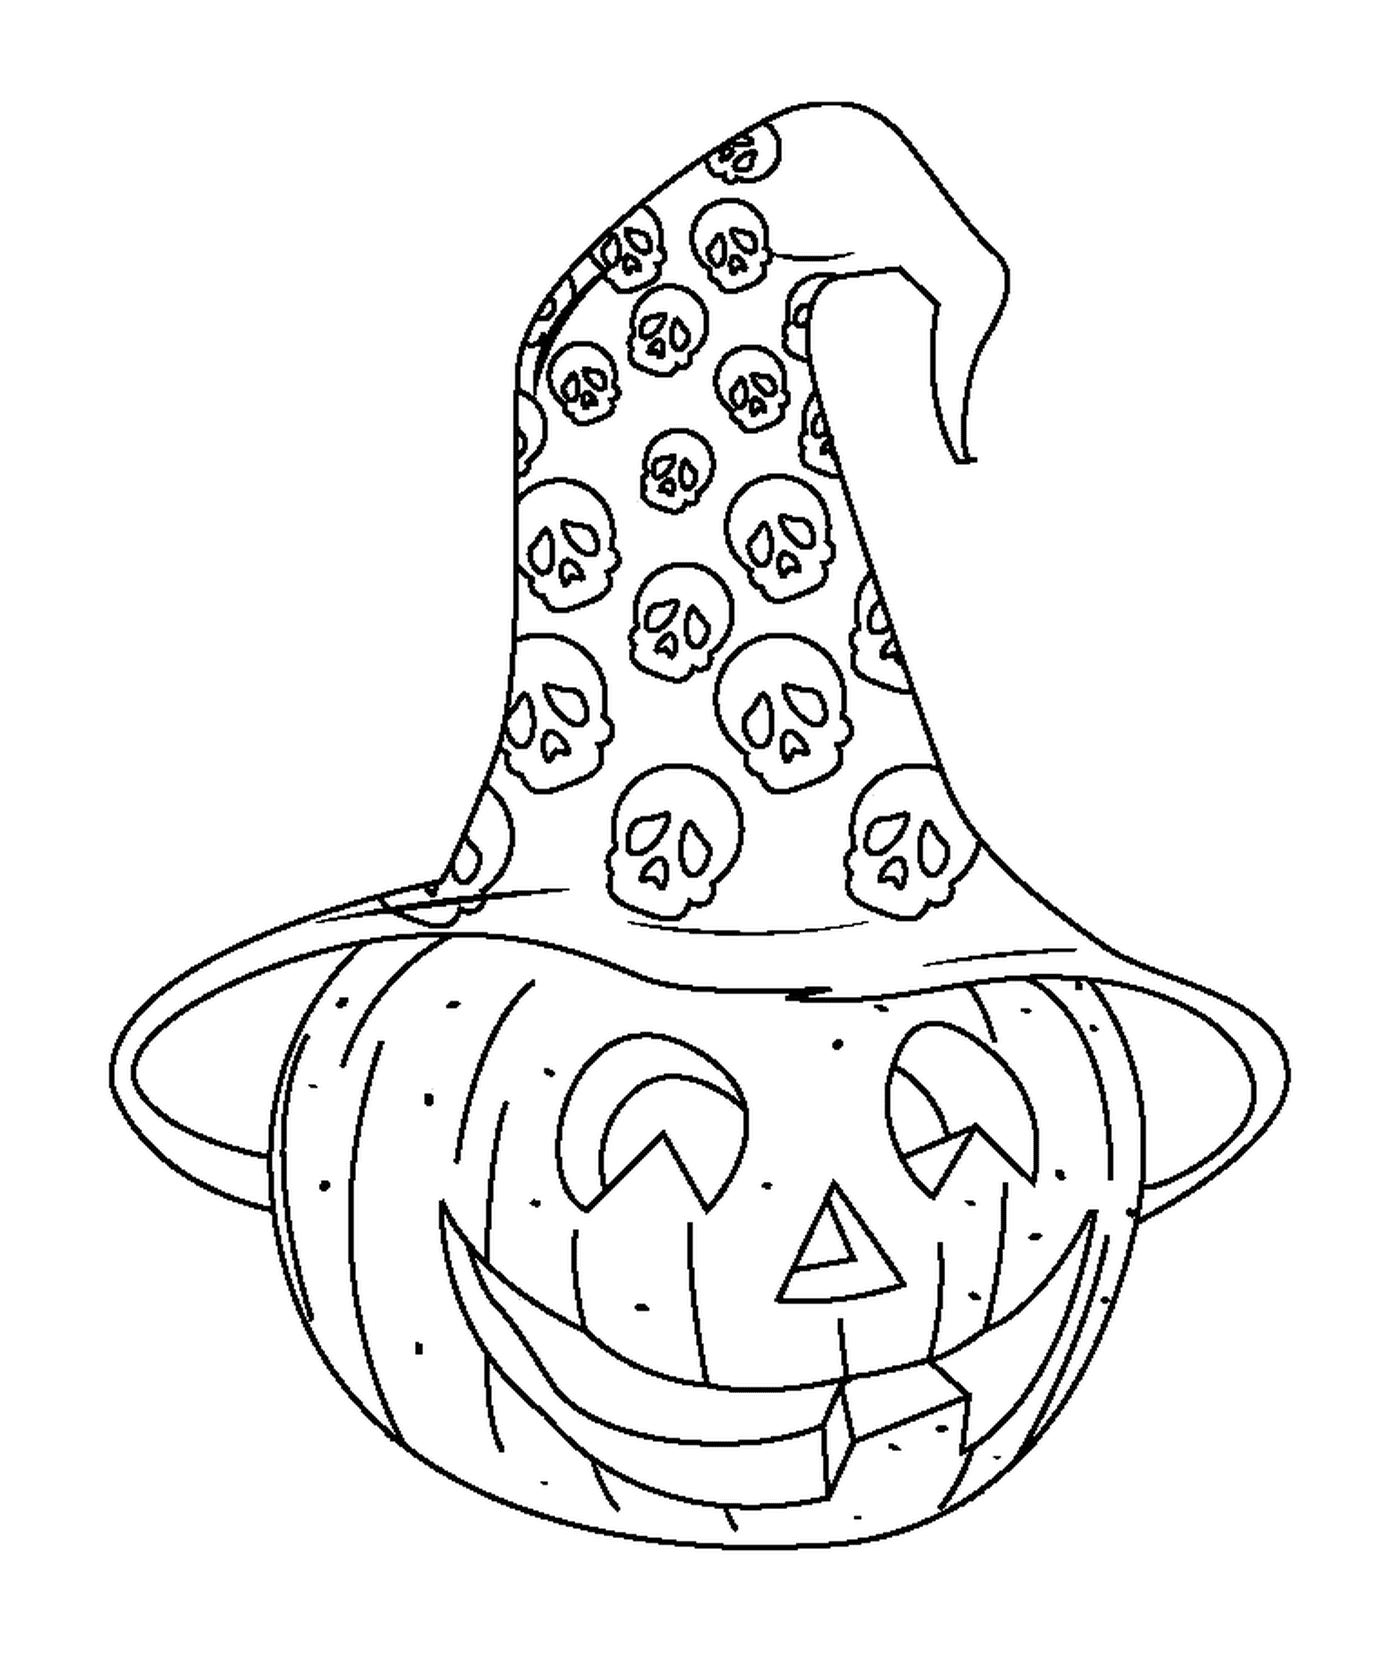  Pumpkin with a hat of dead 